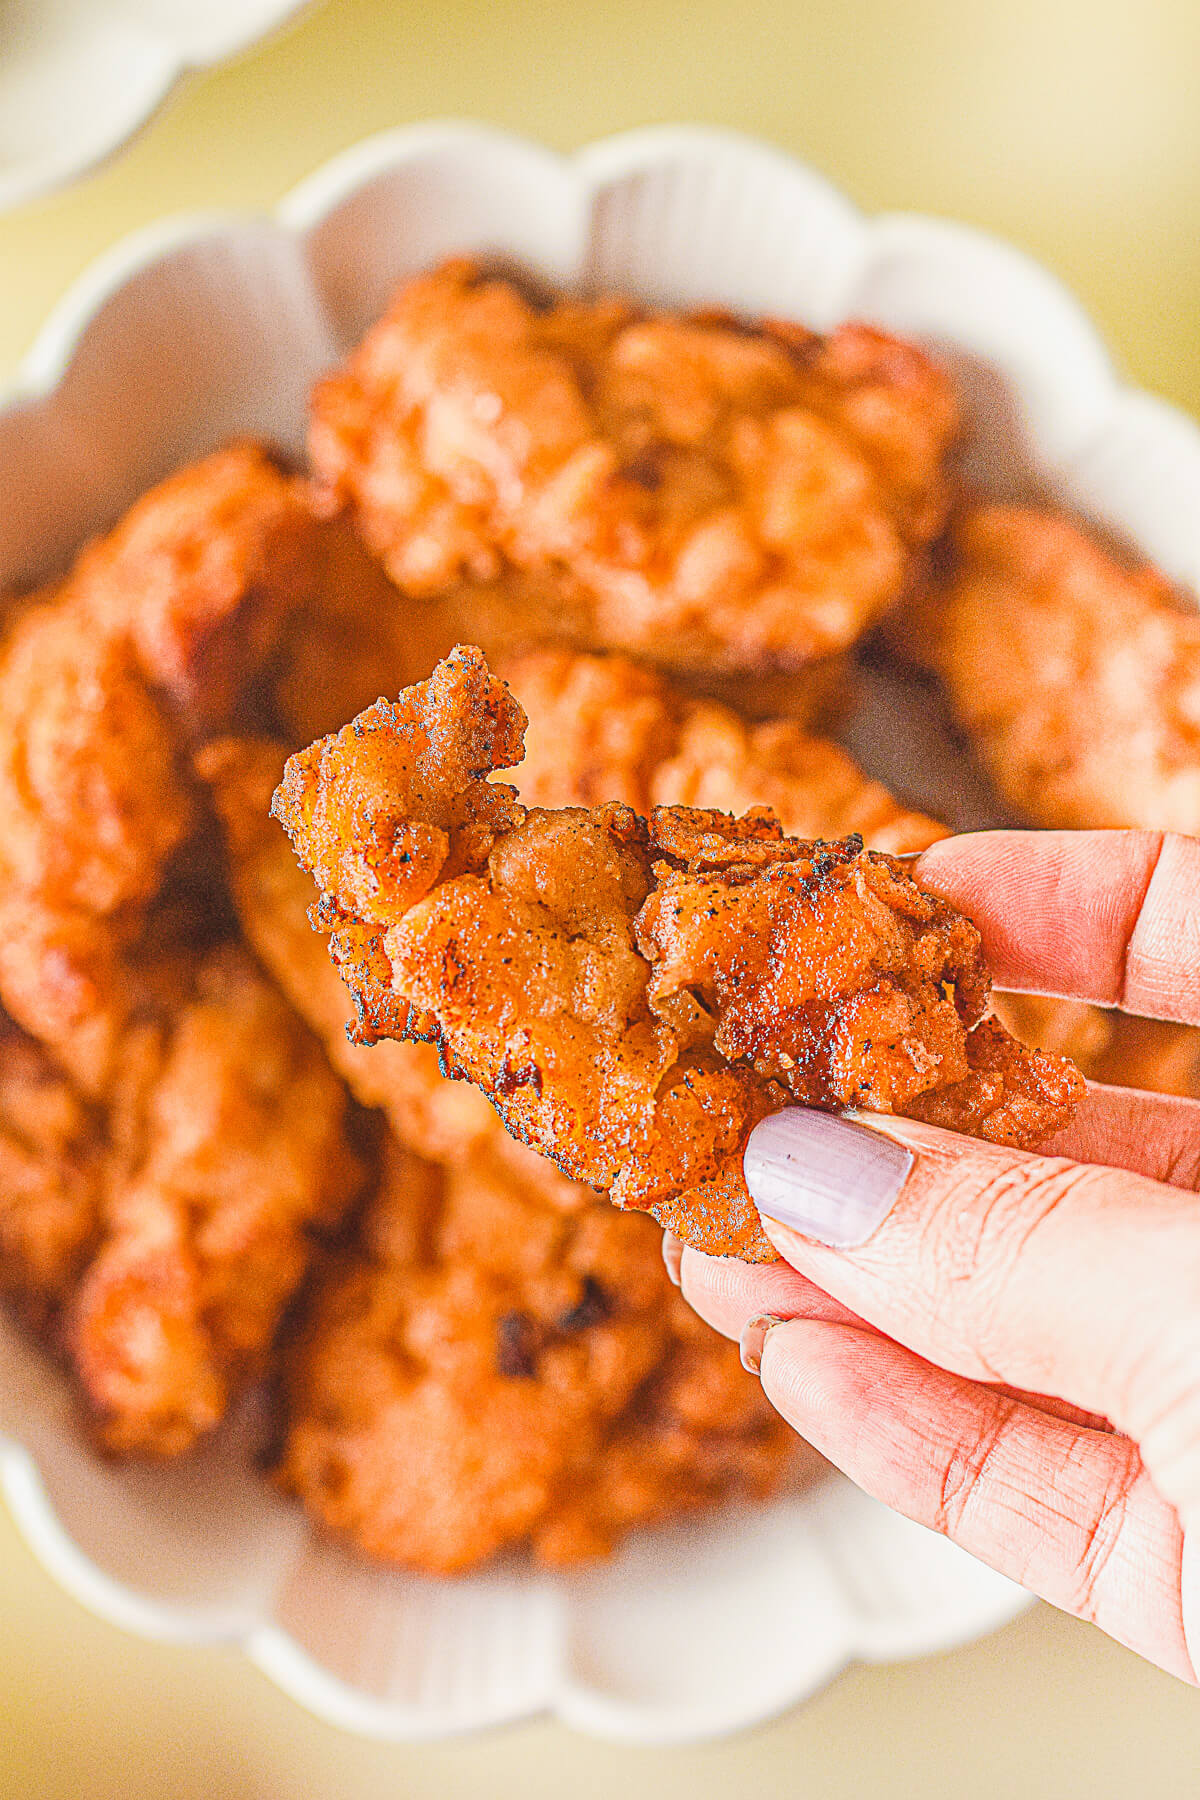 A hand holds a piece of golden fried Mochiko chicken above a dish of fried chicken.